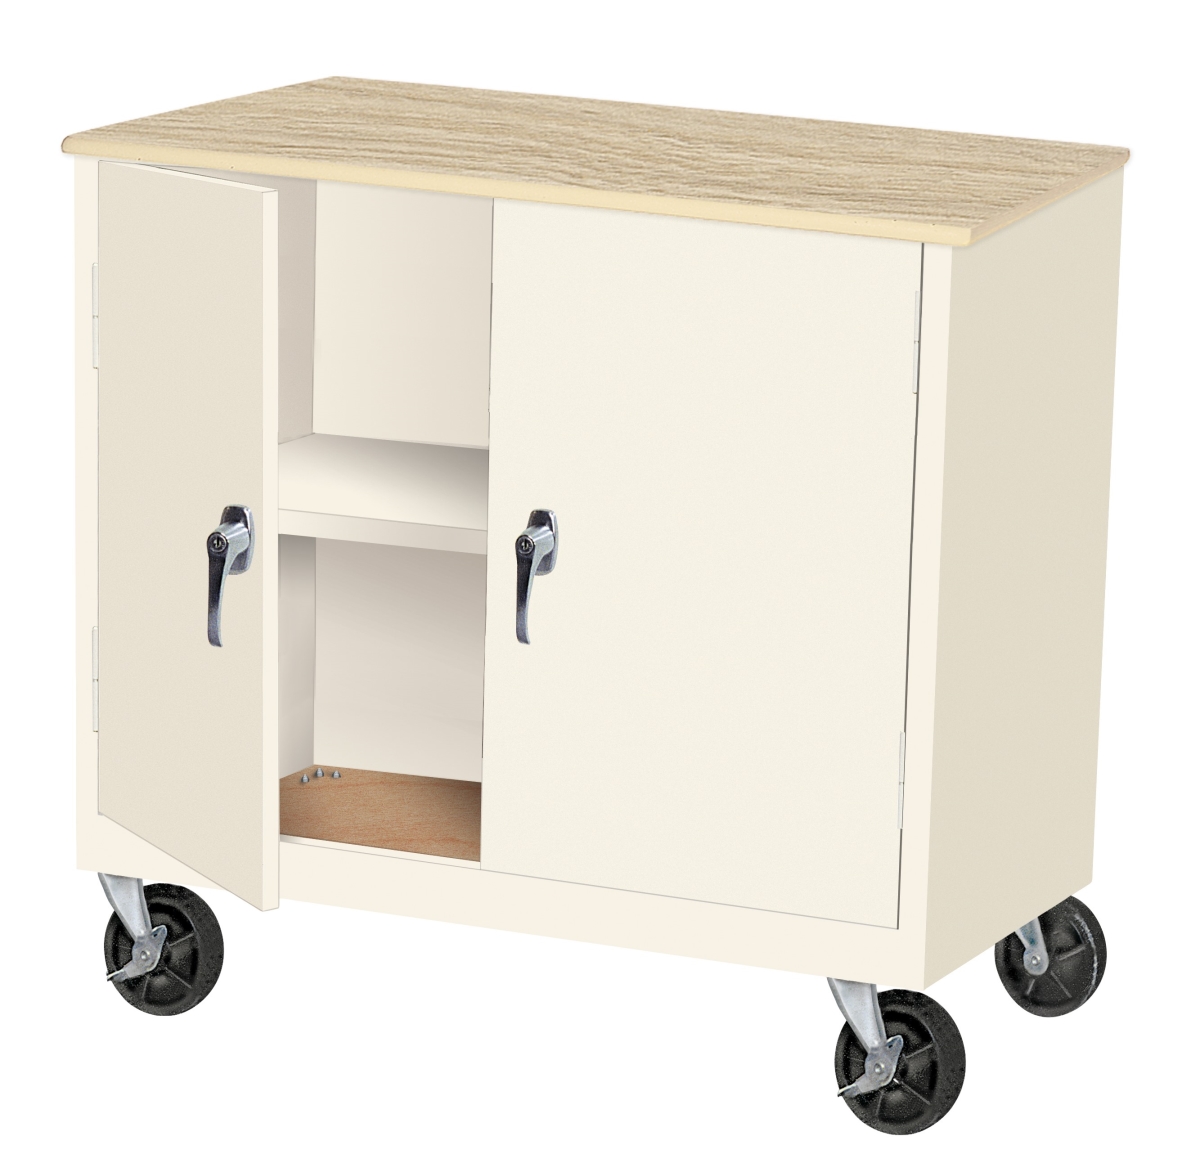 Mobile Cabinets With 3 Adjustable Shelves - Tropic Sand, 36 X 18 X 66 In.